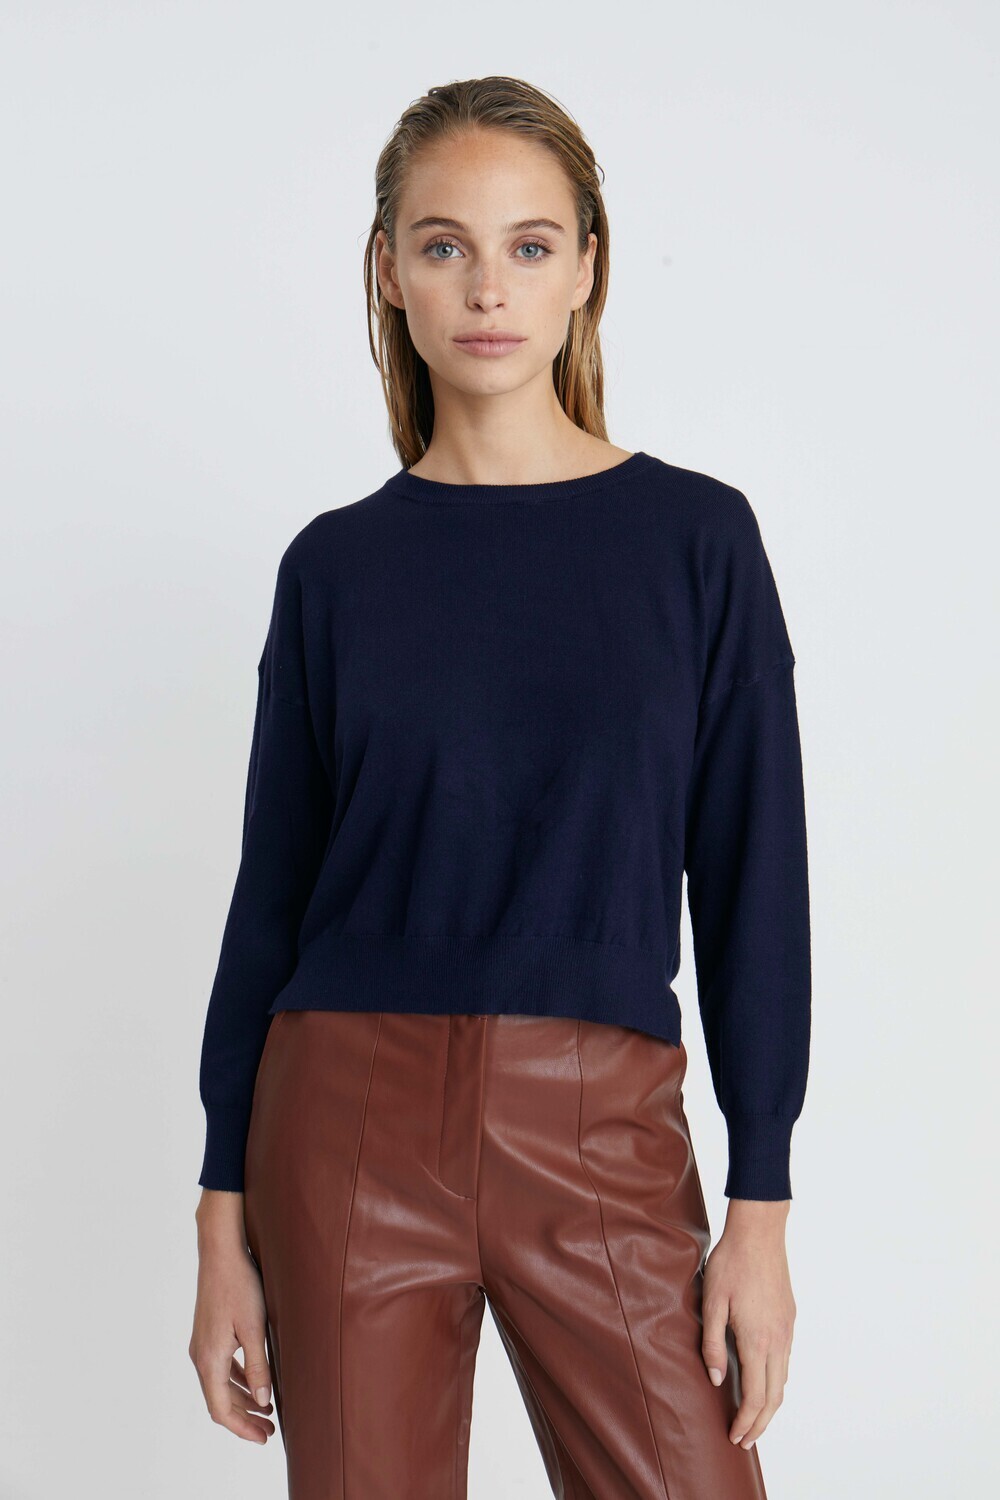 Deluc Polly Sweater